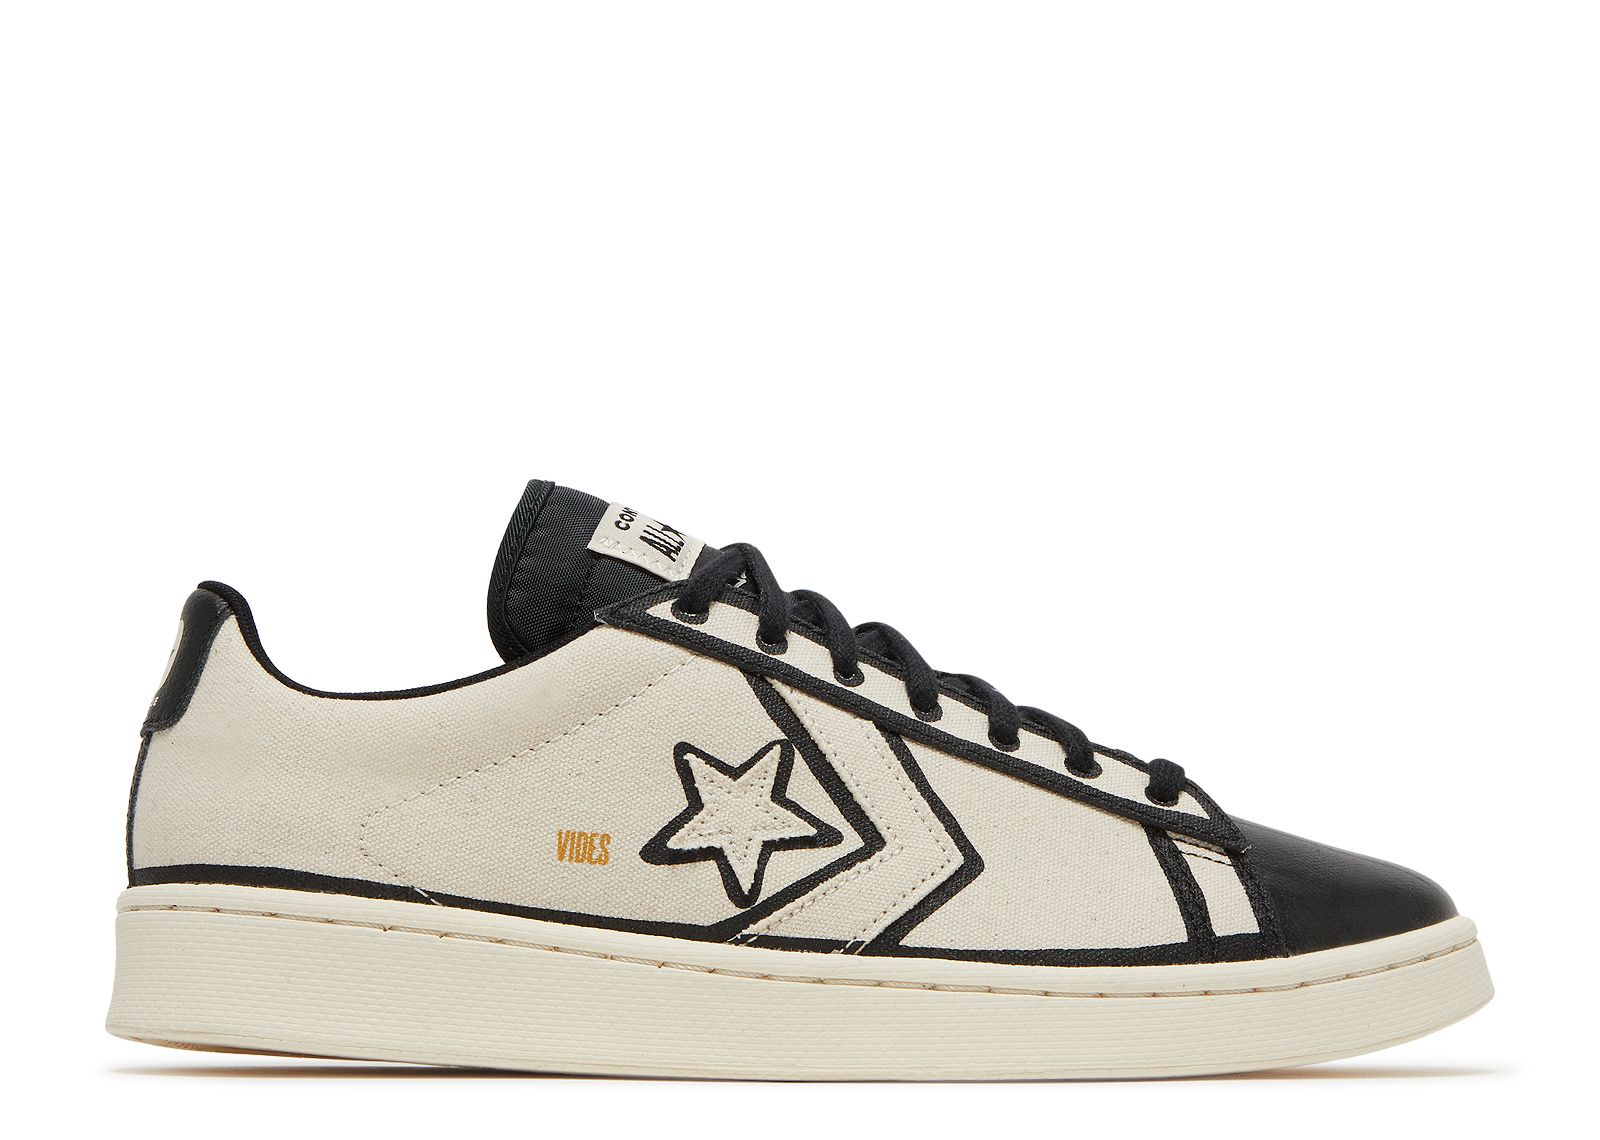 converse pro leather it s possible Кроссовки Converse Joshua Vides X Pro Leather 'Made In Studio', кремовый